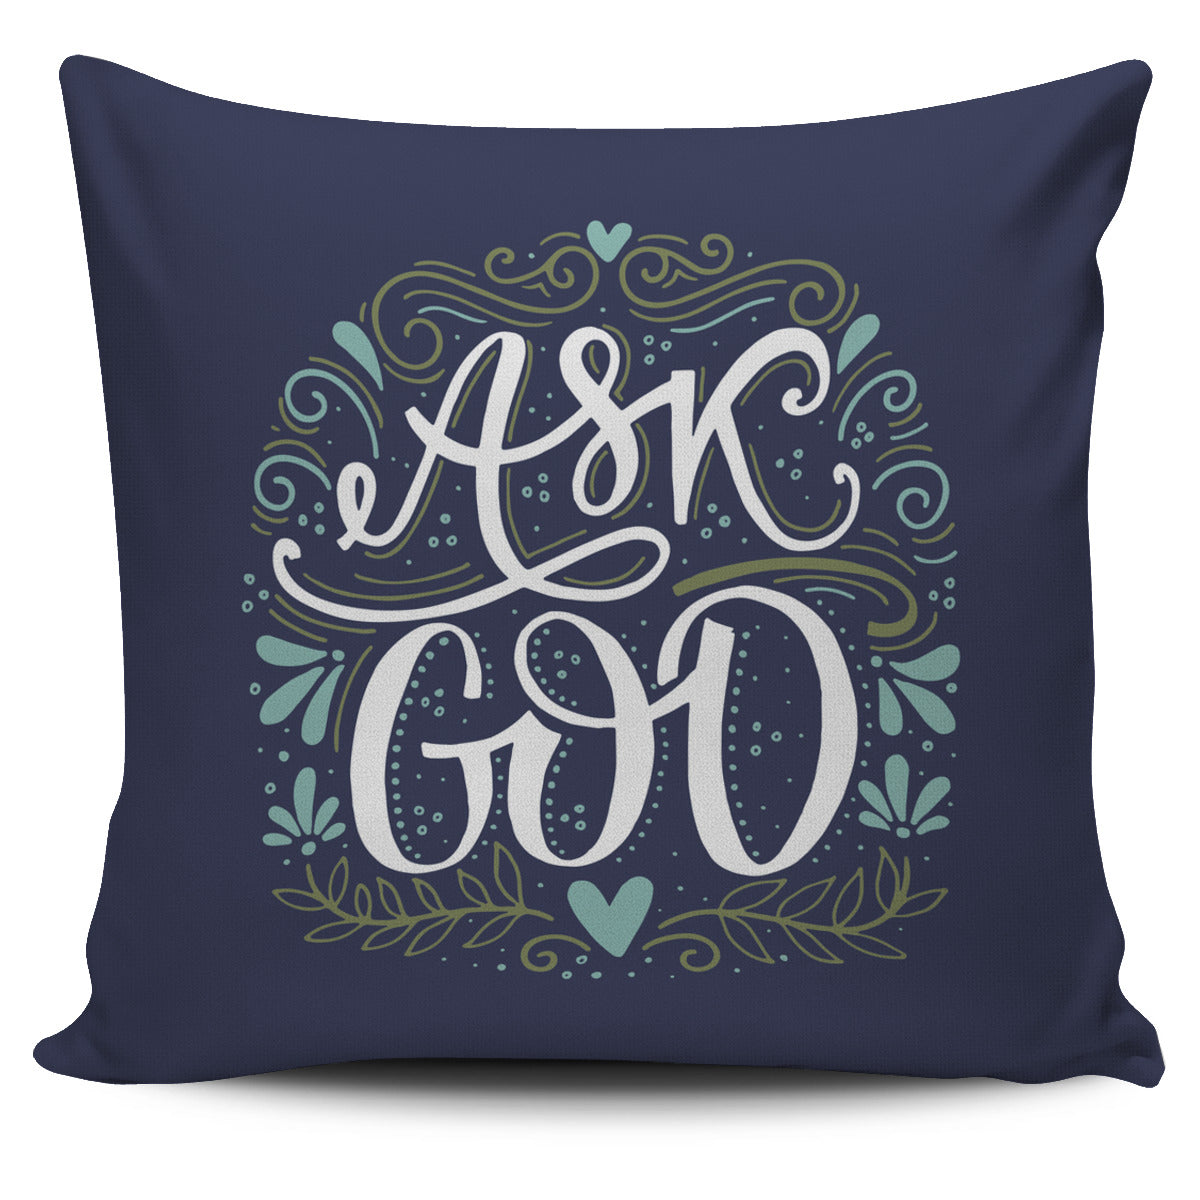 Ask God Pillow Cover